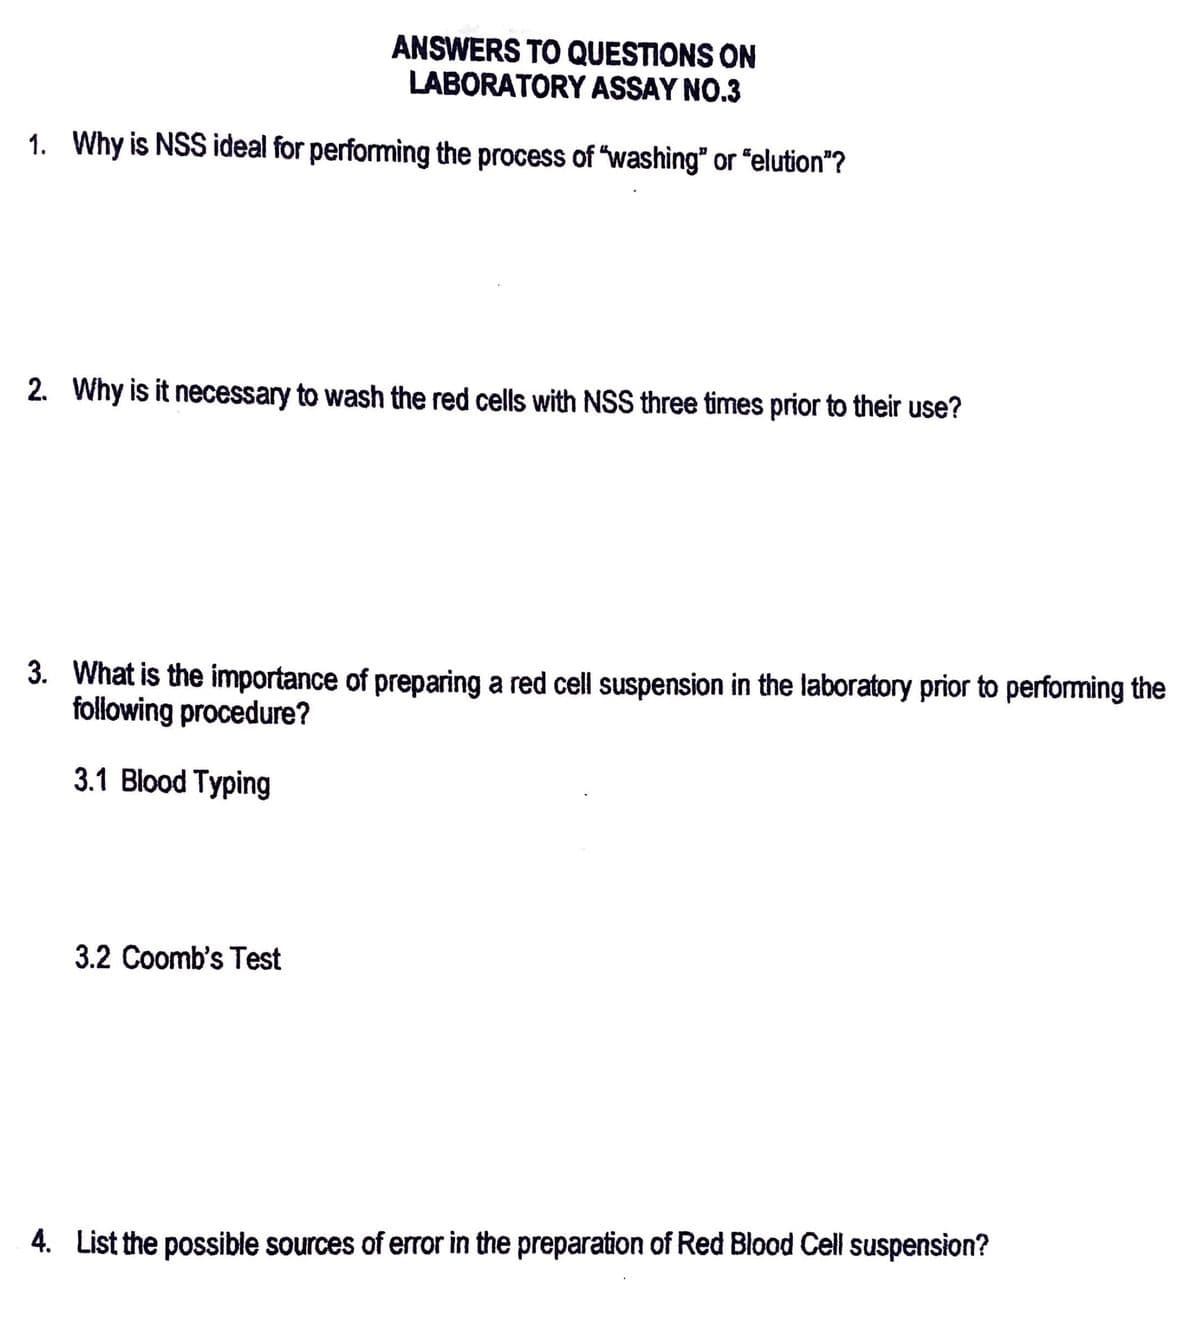 ANSWERS TO QUESTIONS ON
LABORATORY ASSAY NO.3
1. Why is NSS ideal for performing the process of "washing" or "elution"?
2. Why is it necessary to wash the red cells with NSS three times prior to their use?
3. What is the importance of preparing a red cell suspension in the laboratory prior to performing the
following procedure?
3.1 Blood Typing
3.2 Coomb's Test
4. List the possible sources of error in the preparation of Red Blood Cell suspension?